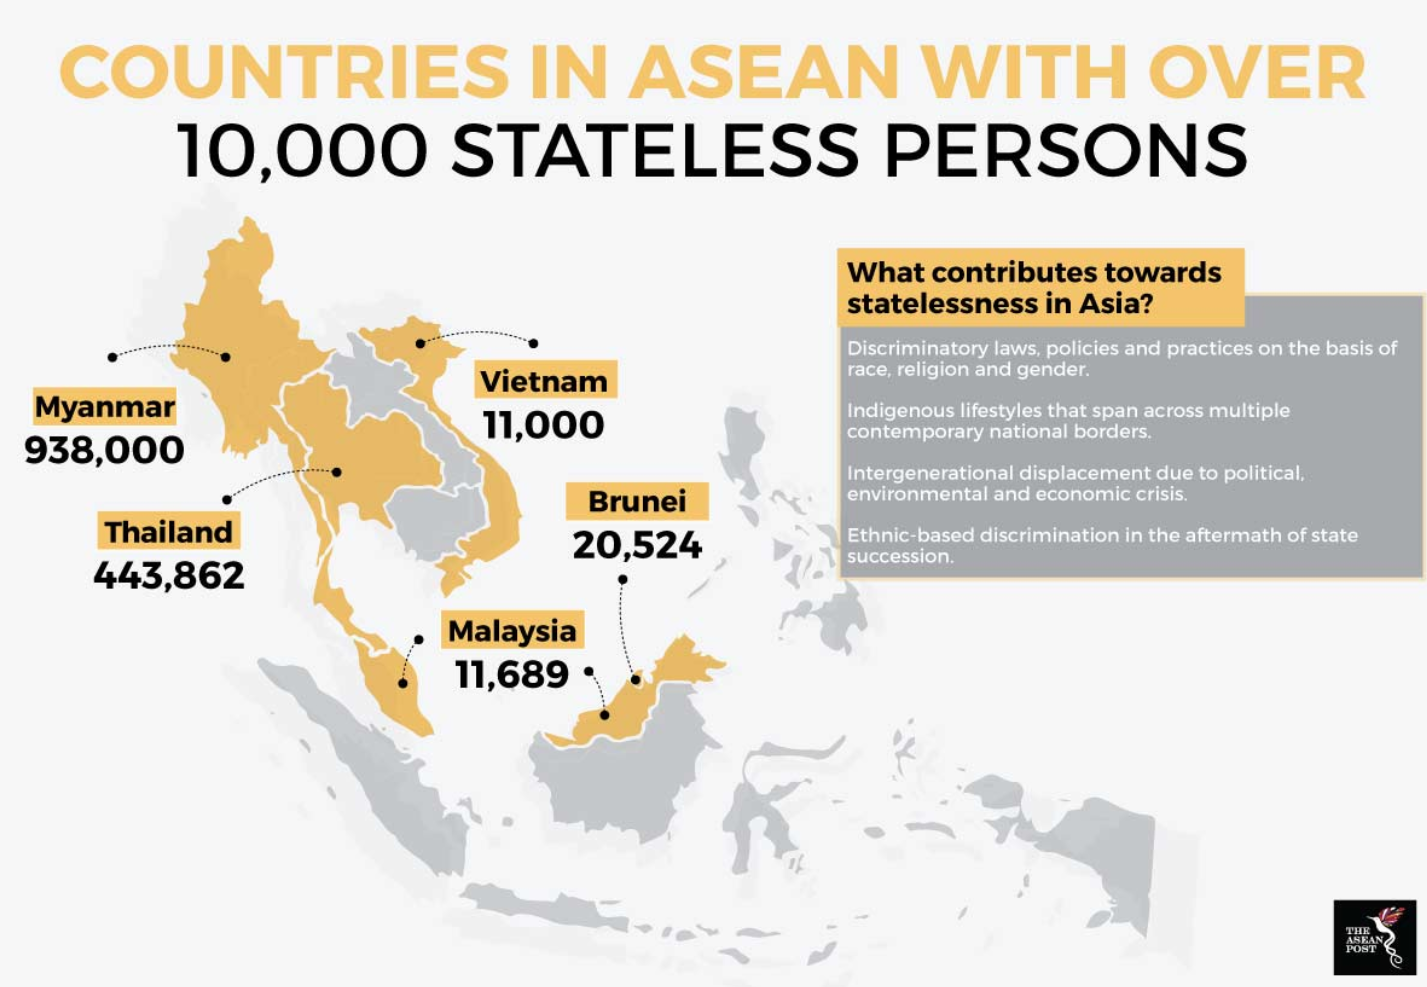 Thailand has one of the highest amounts of stateless people 